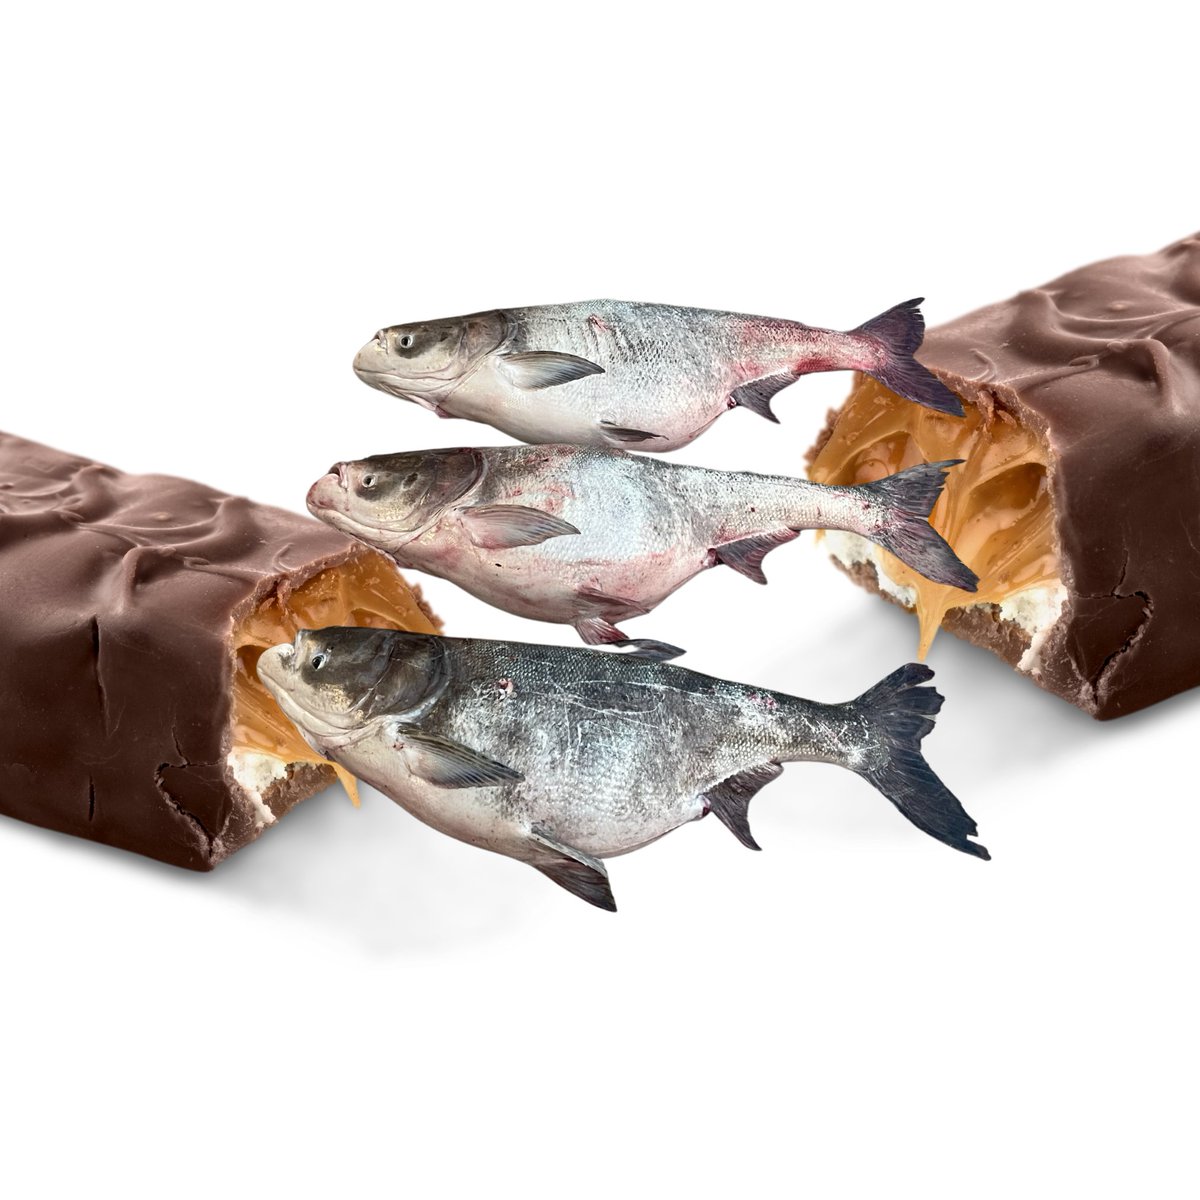 Parents, now is the time to be on guard. We are once again reminding you to be diligent about checking your child's candy throughout the Halloween season. Our biologists have just found THREE invasive bighead carp rolled up and shoved inside an almond joy. We are appalled.